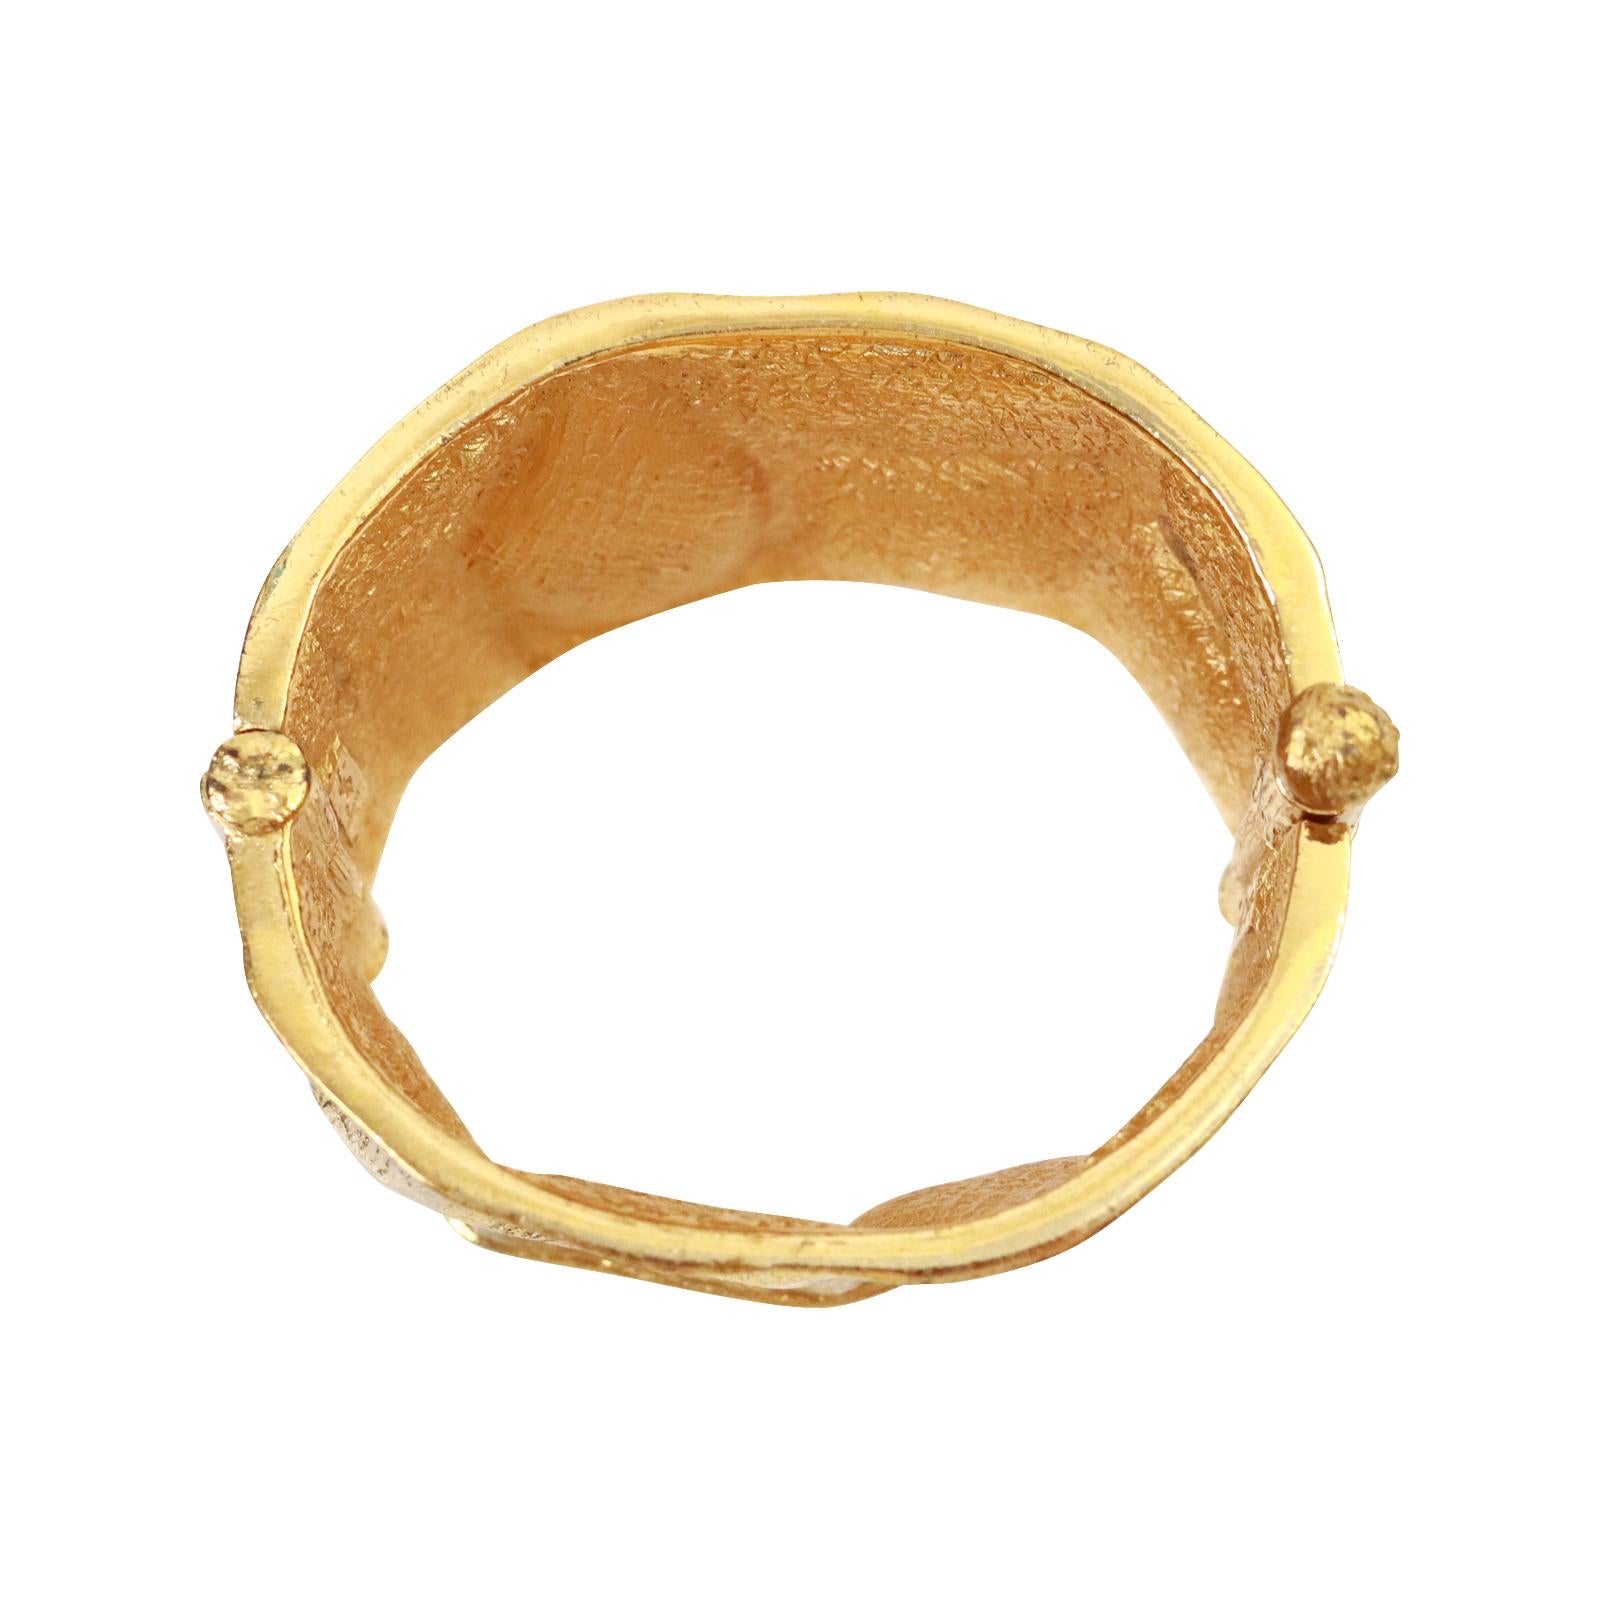 Vintage Yves Saint Laurent YSL Gold Tone Cuff Bracelet Circa 1990s In Good Condition For Sale In New York, NY